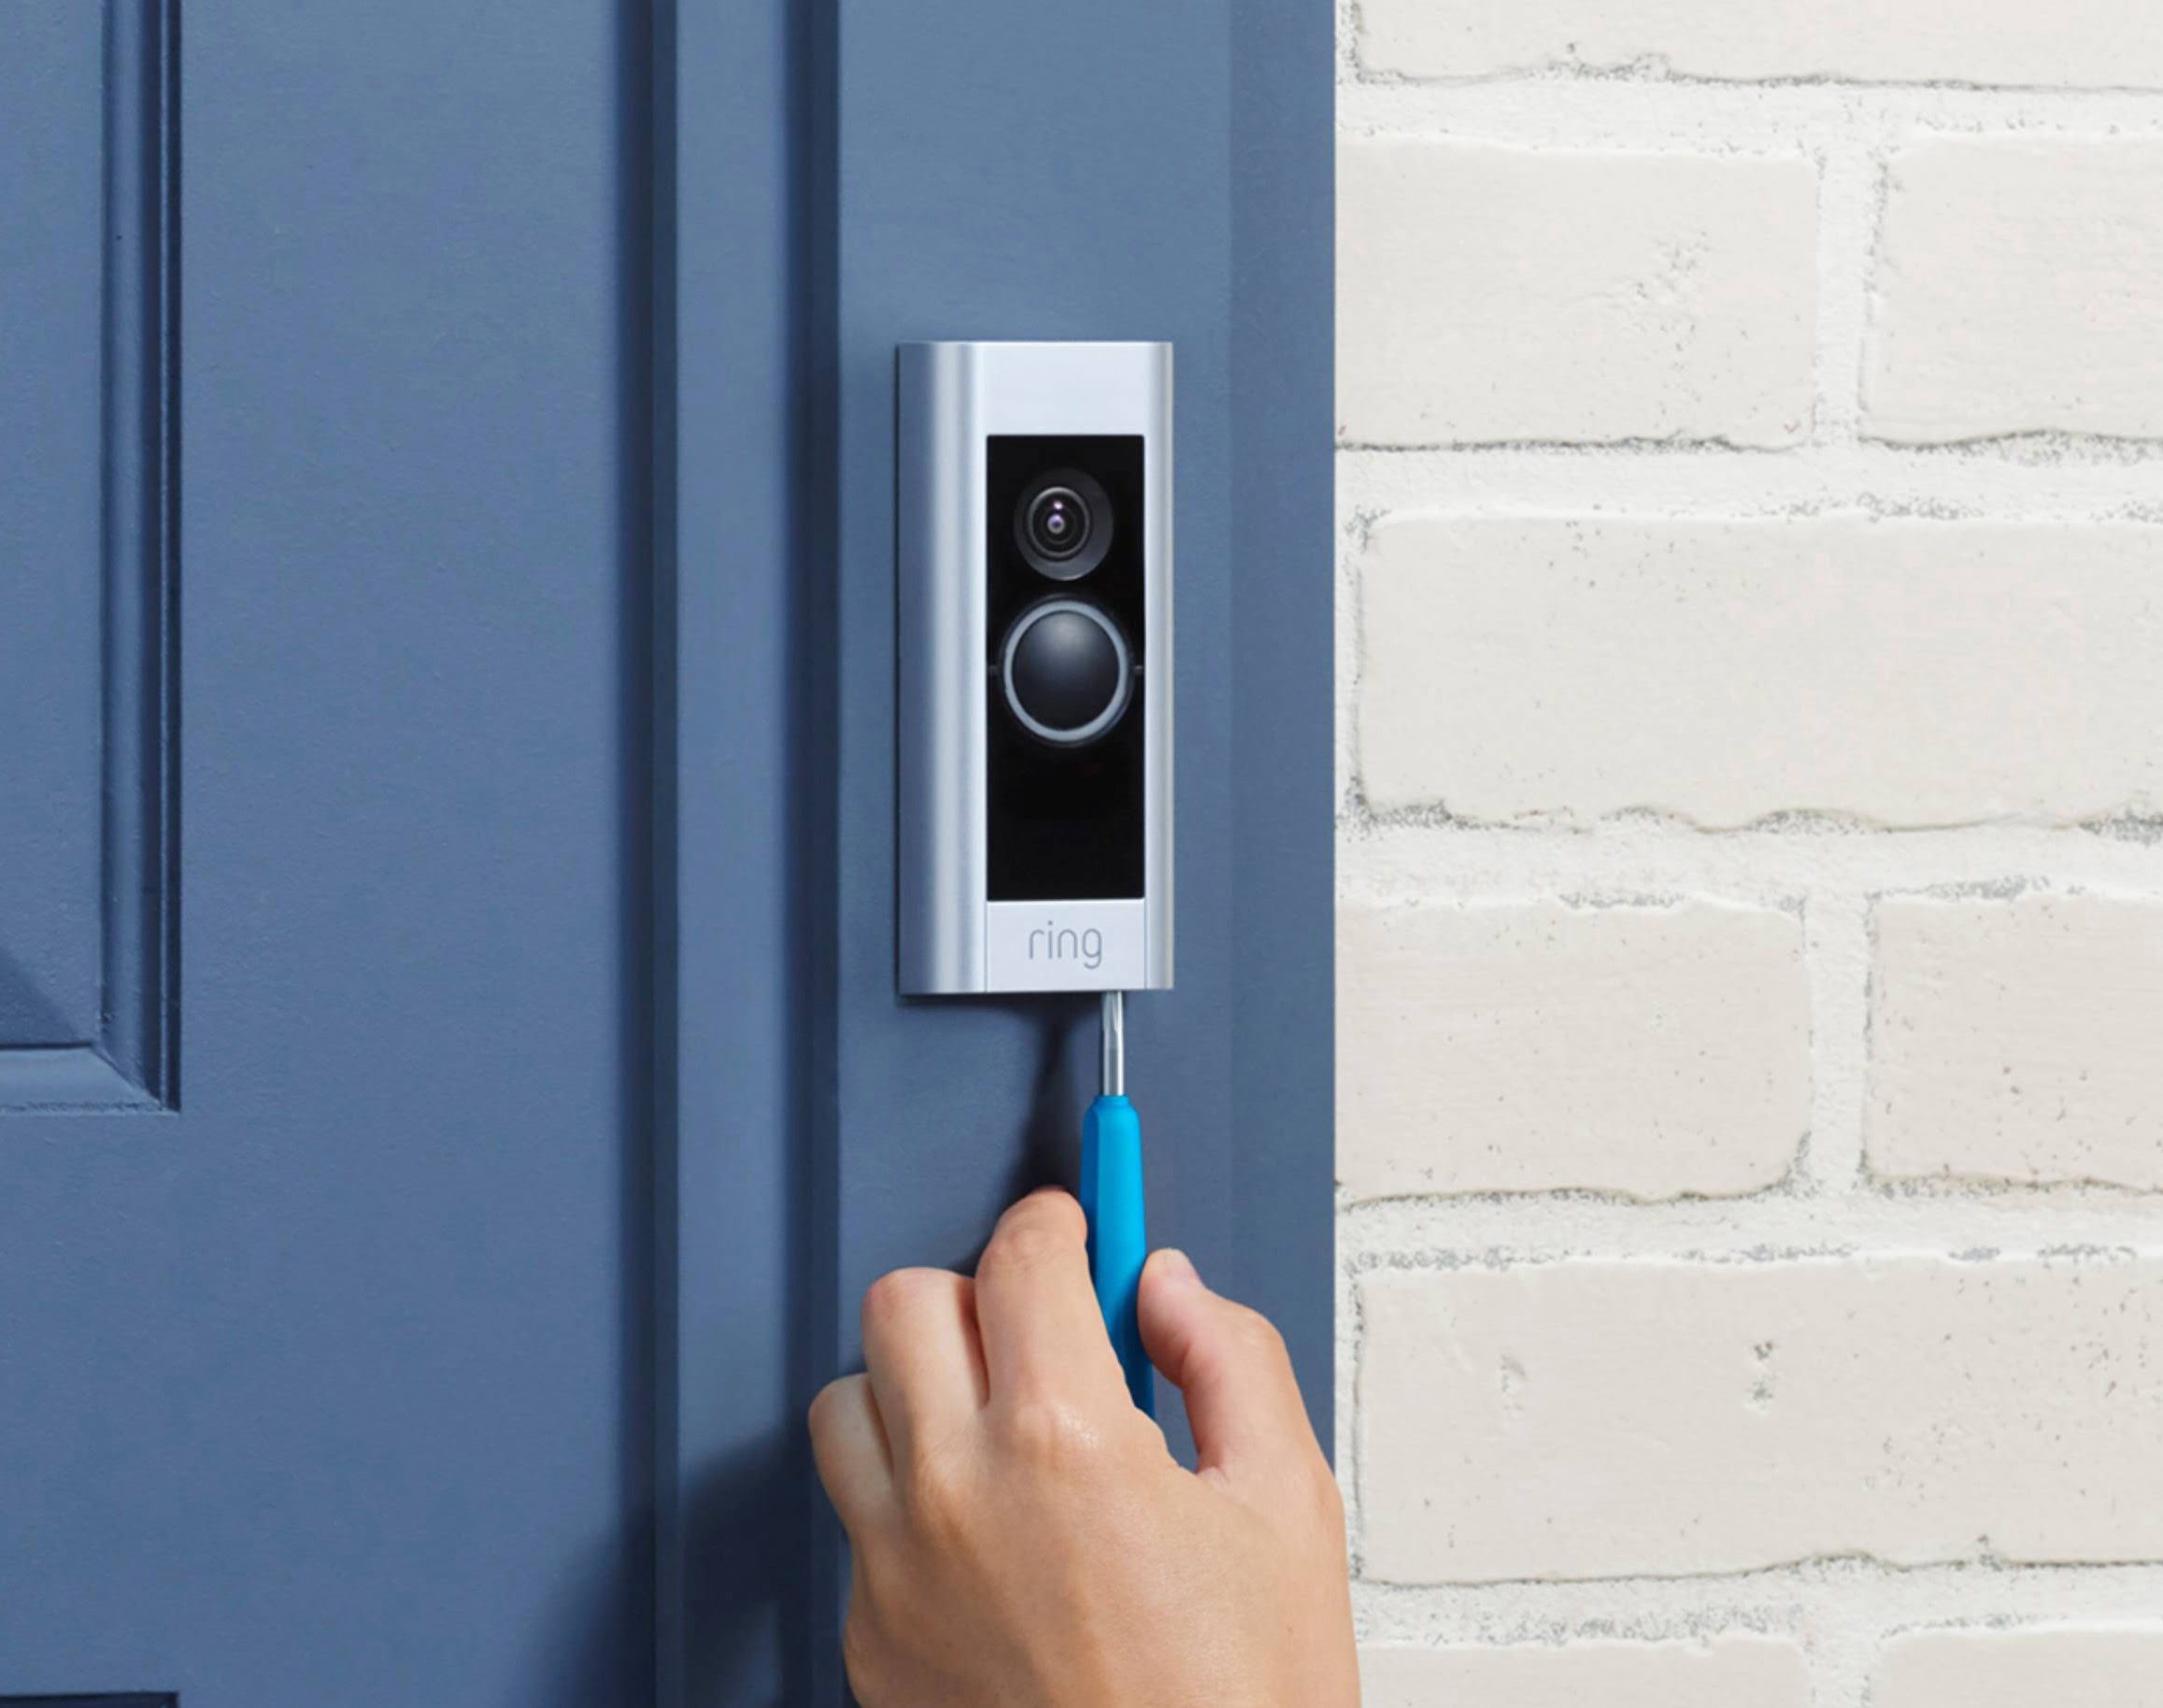 How To Remove The Faceplate On Ring Doorbell